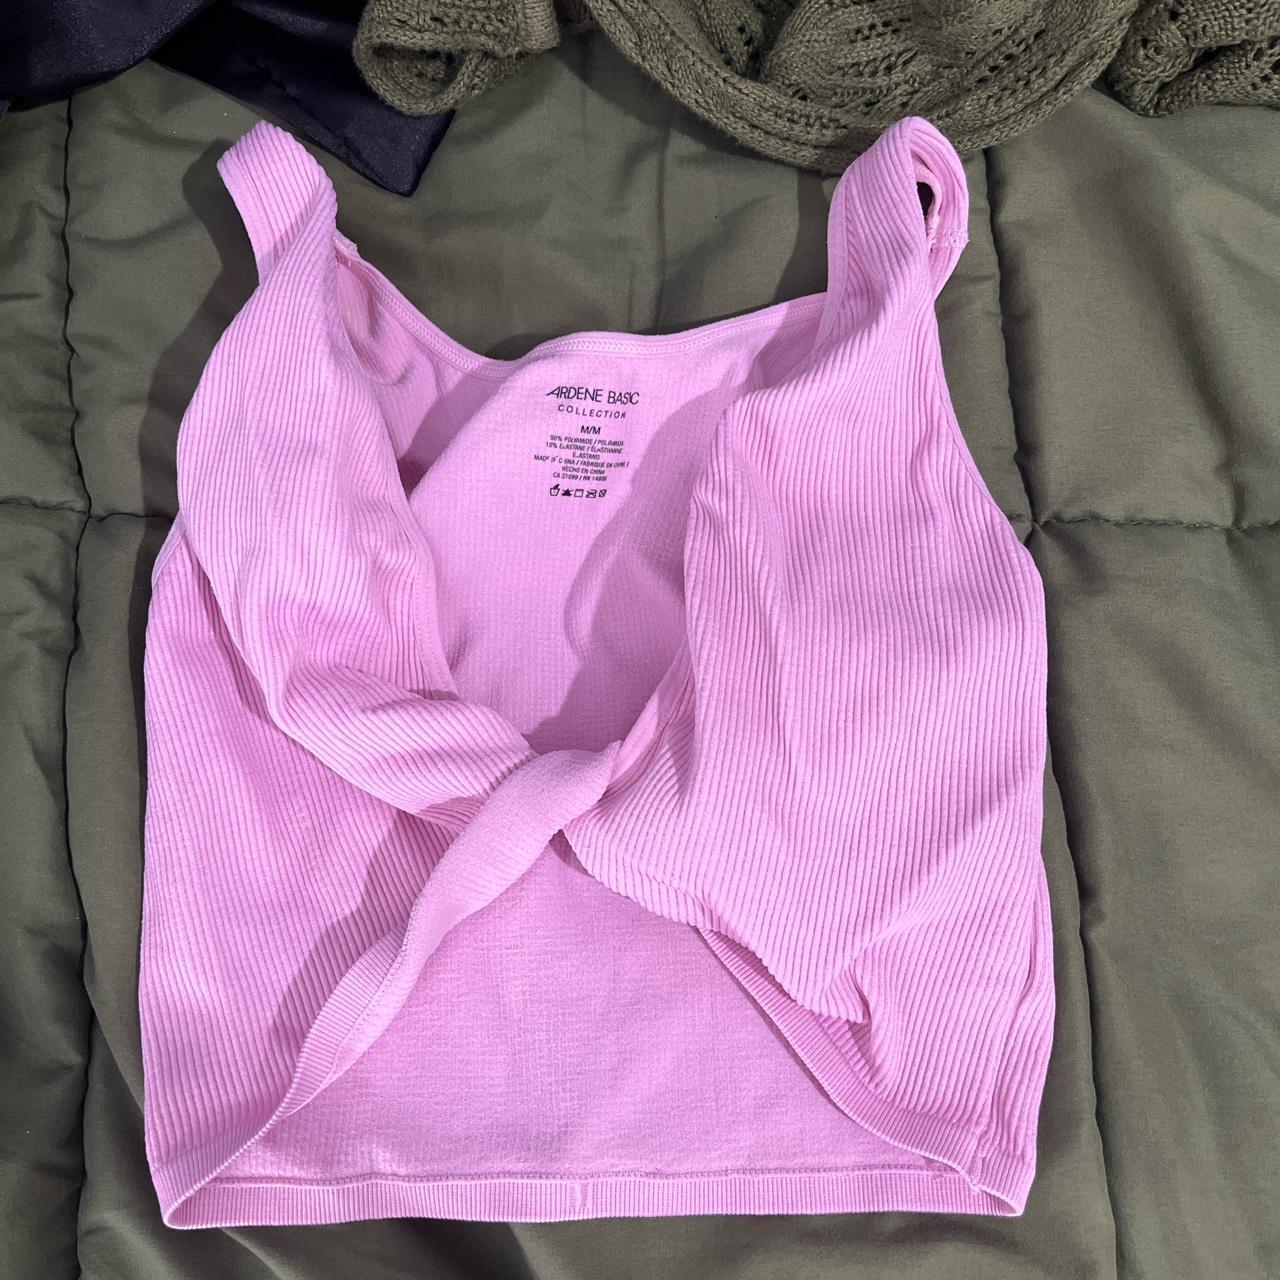 Urban Outfitters Women's Pink Crop-top